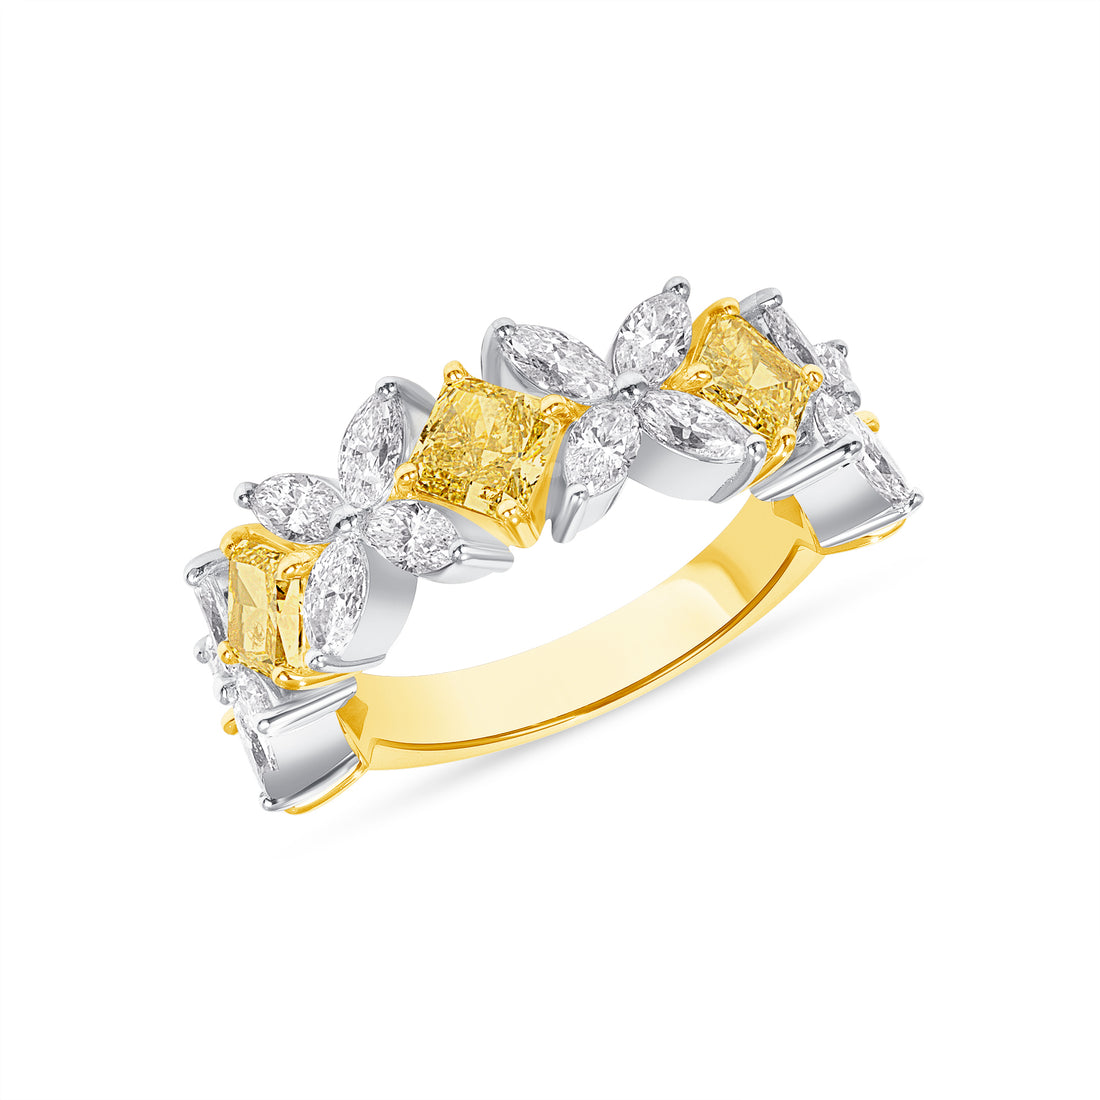 3.46 CT. Square Fancy Yellow Diamond and Marquise Diamond Ring in 18K Yellow Gold and Platinum